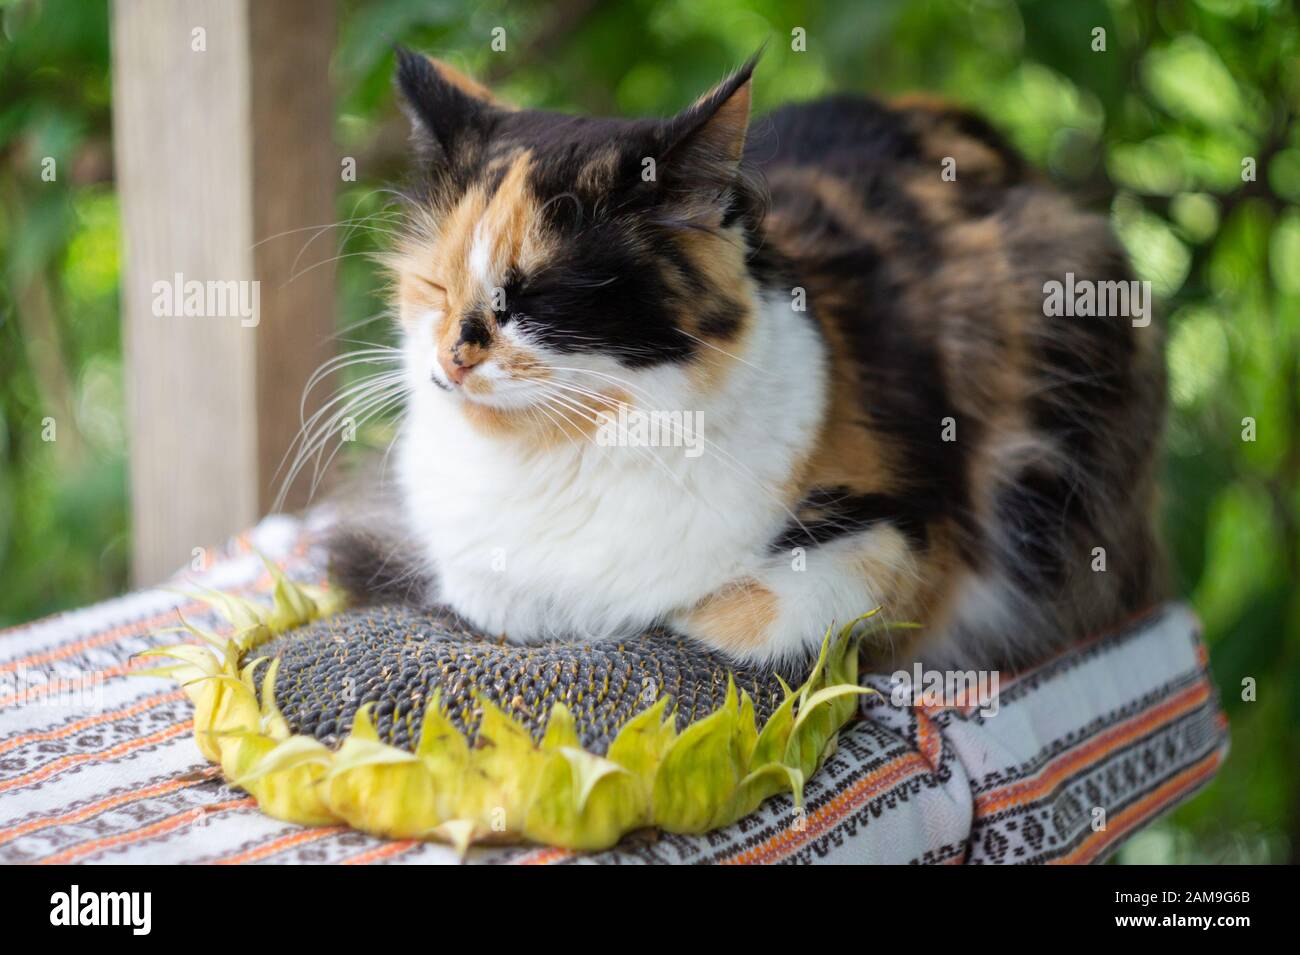 Threecolor fluffy domestic cat sleeps on a ripe sunflower disk Stock Photo